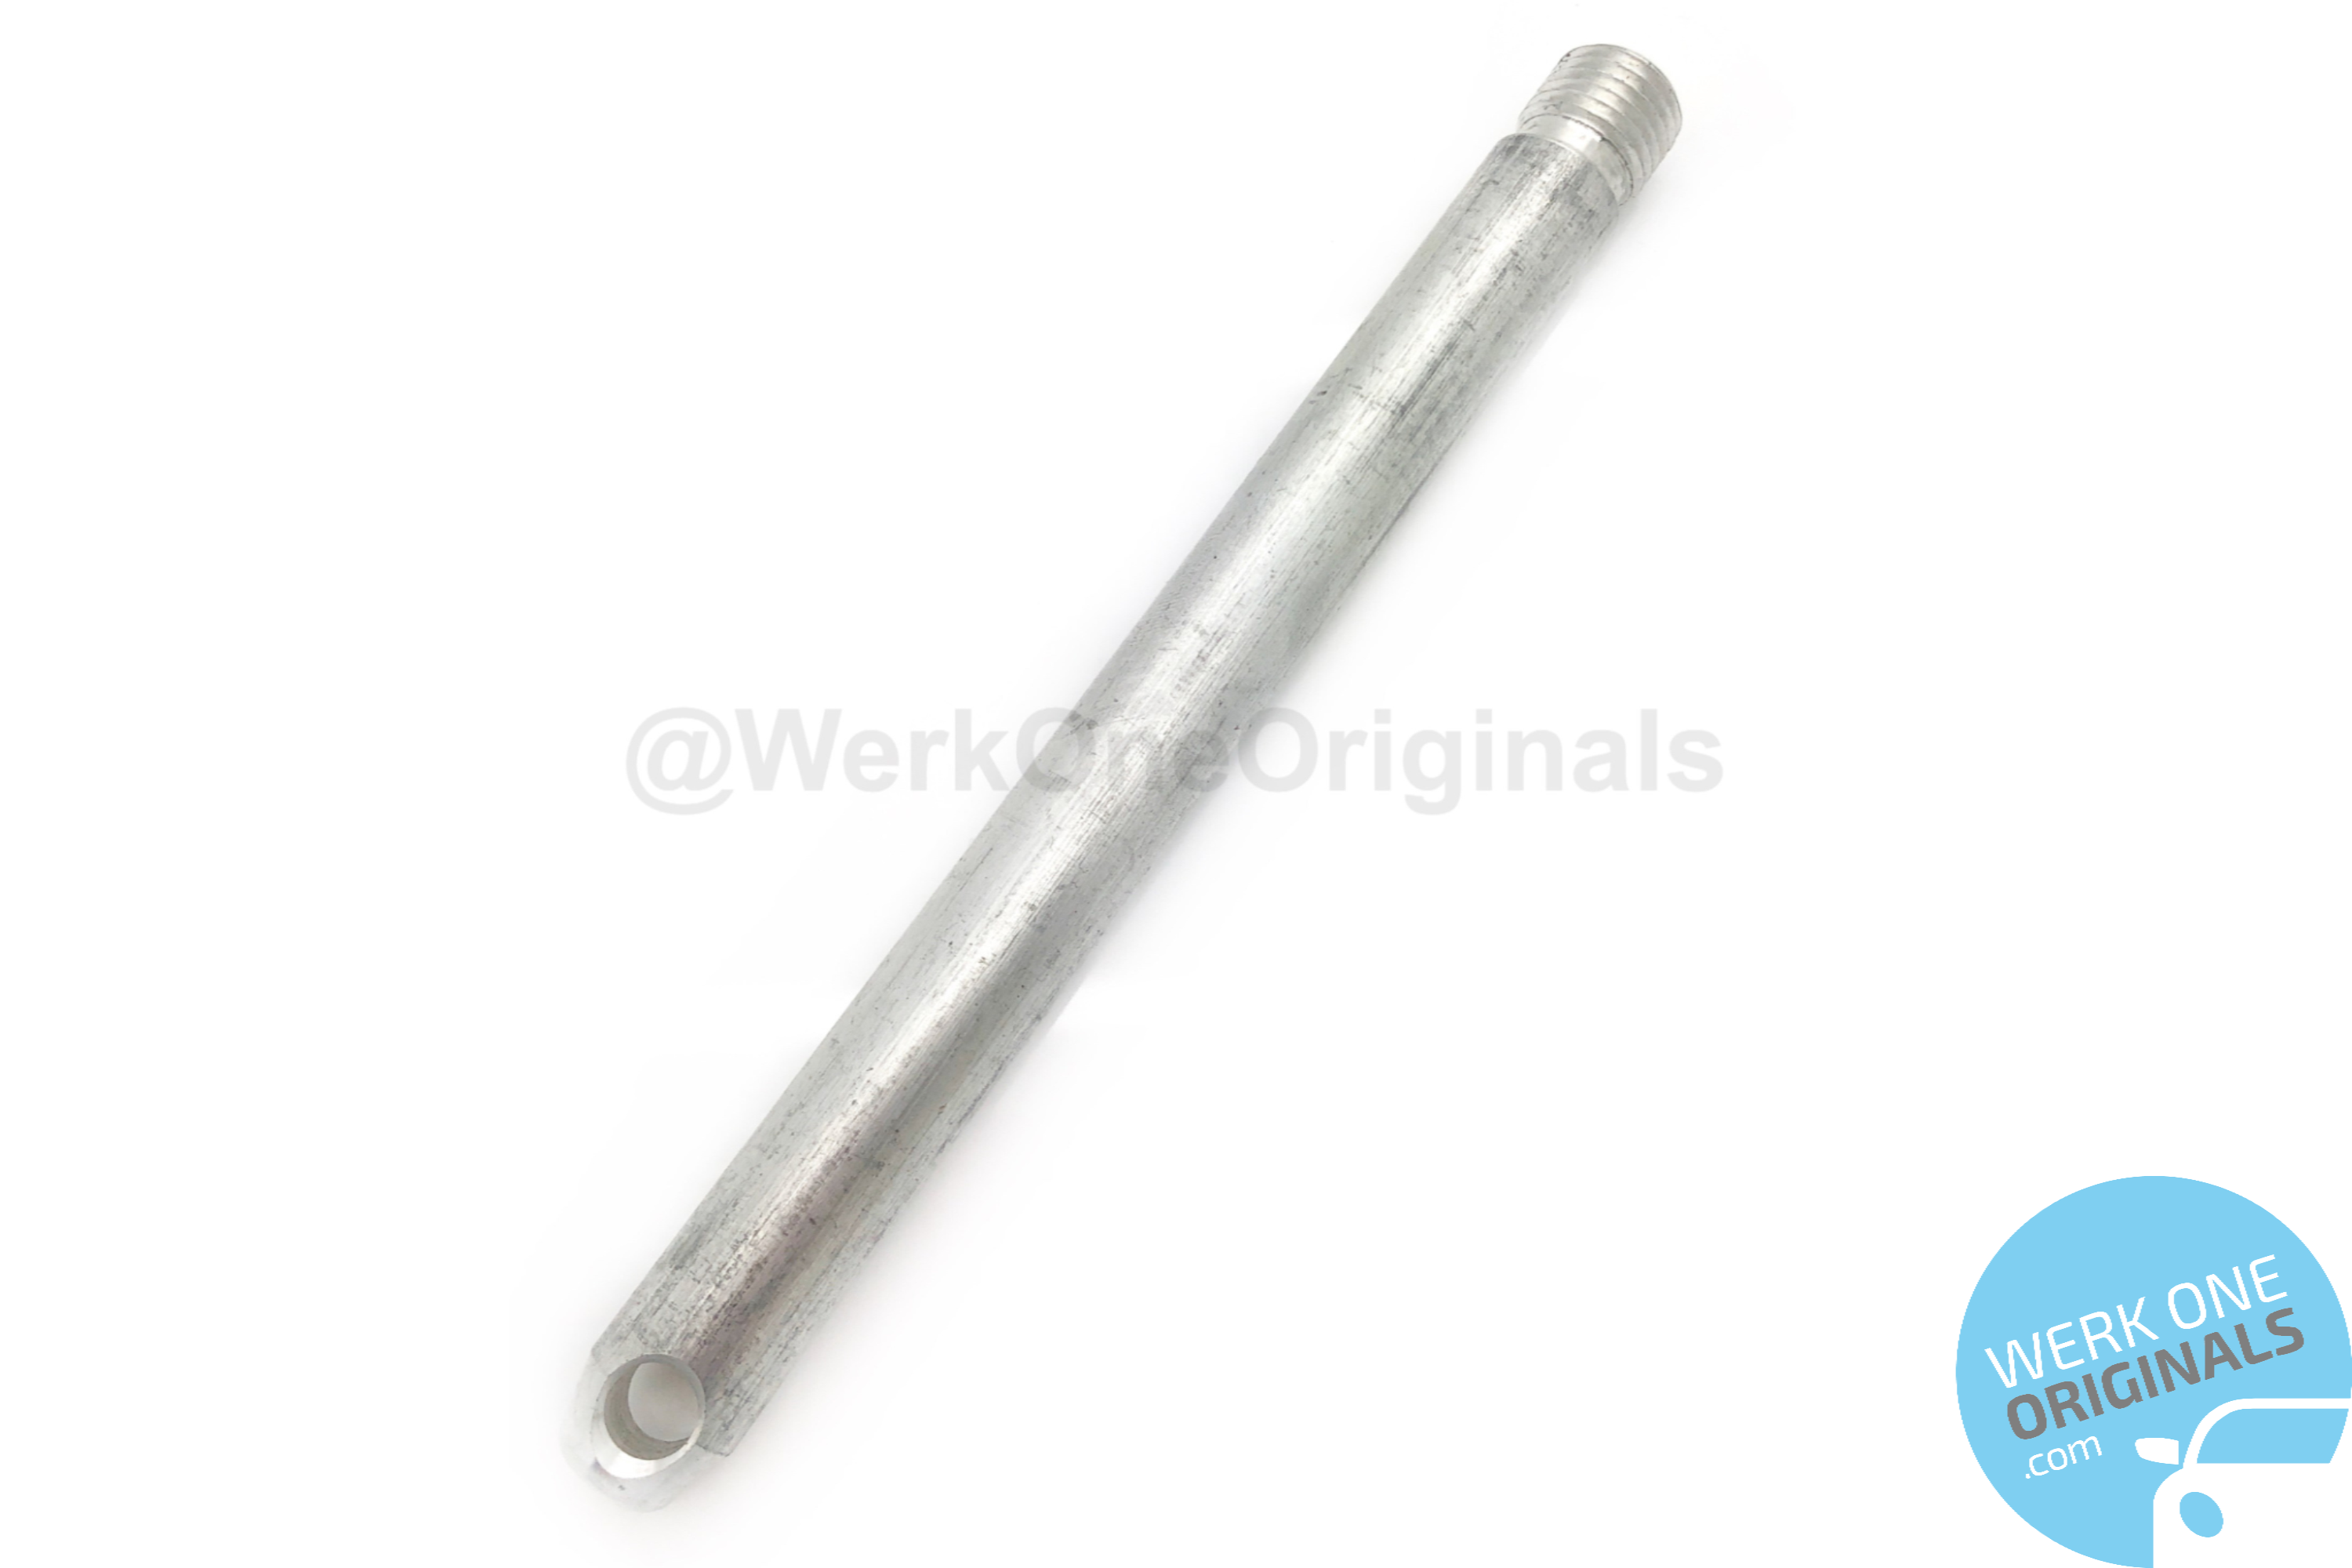 Porsche Official Wheel Removal Tool for Macan Type 95B Models